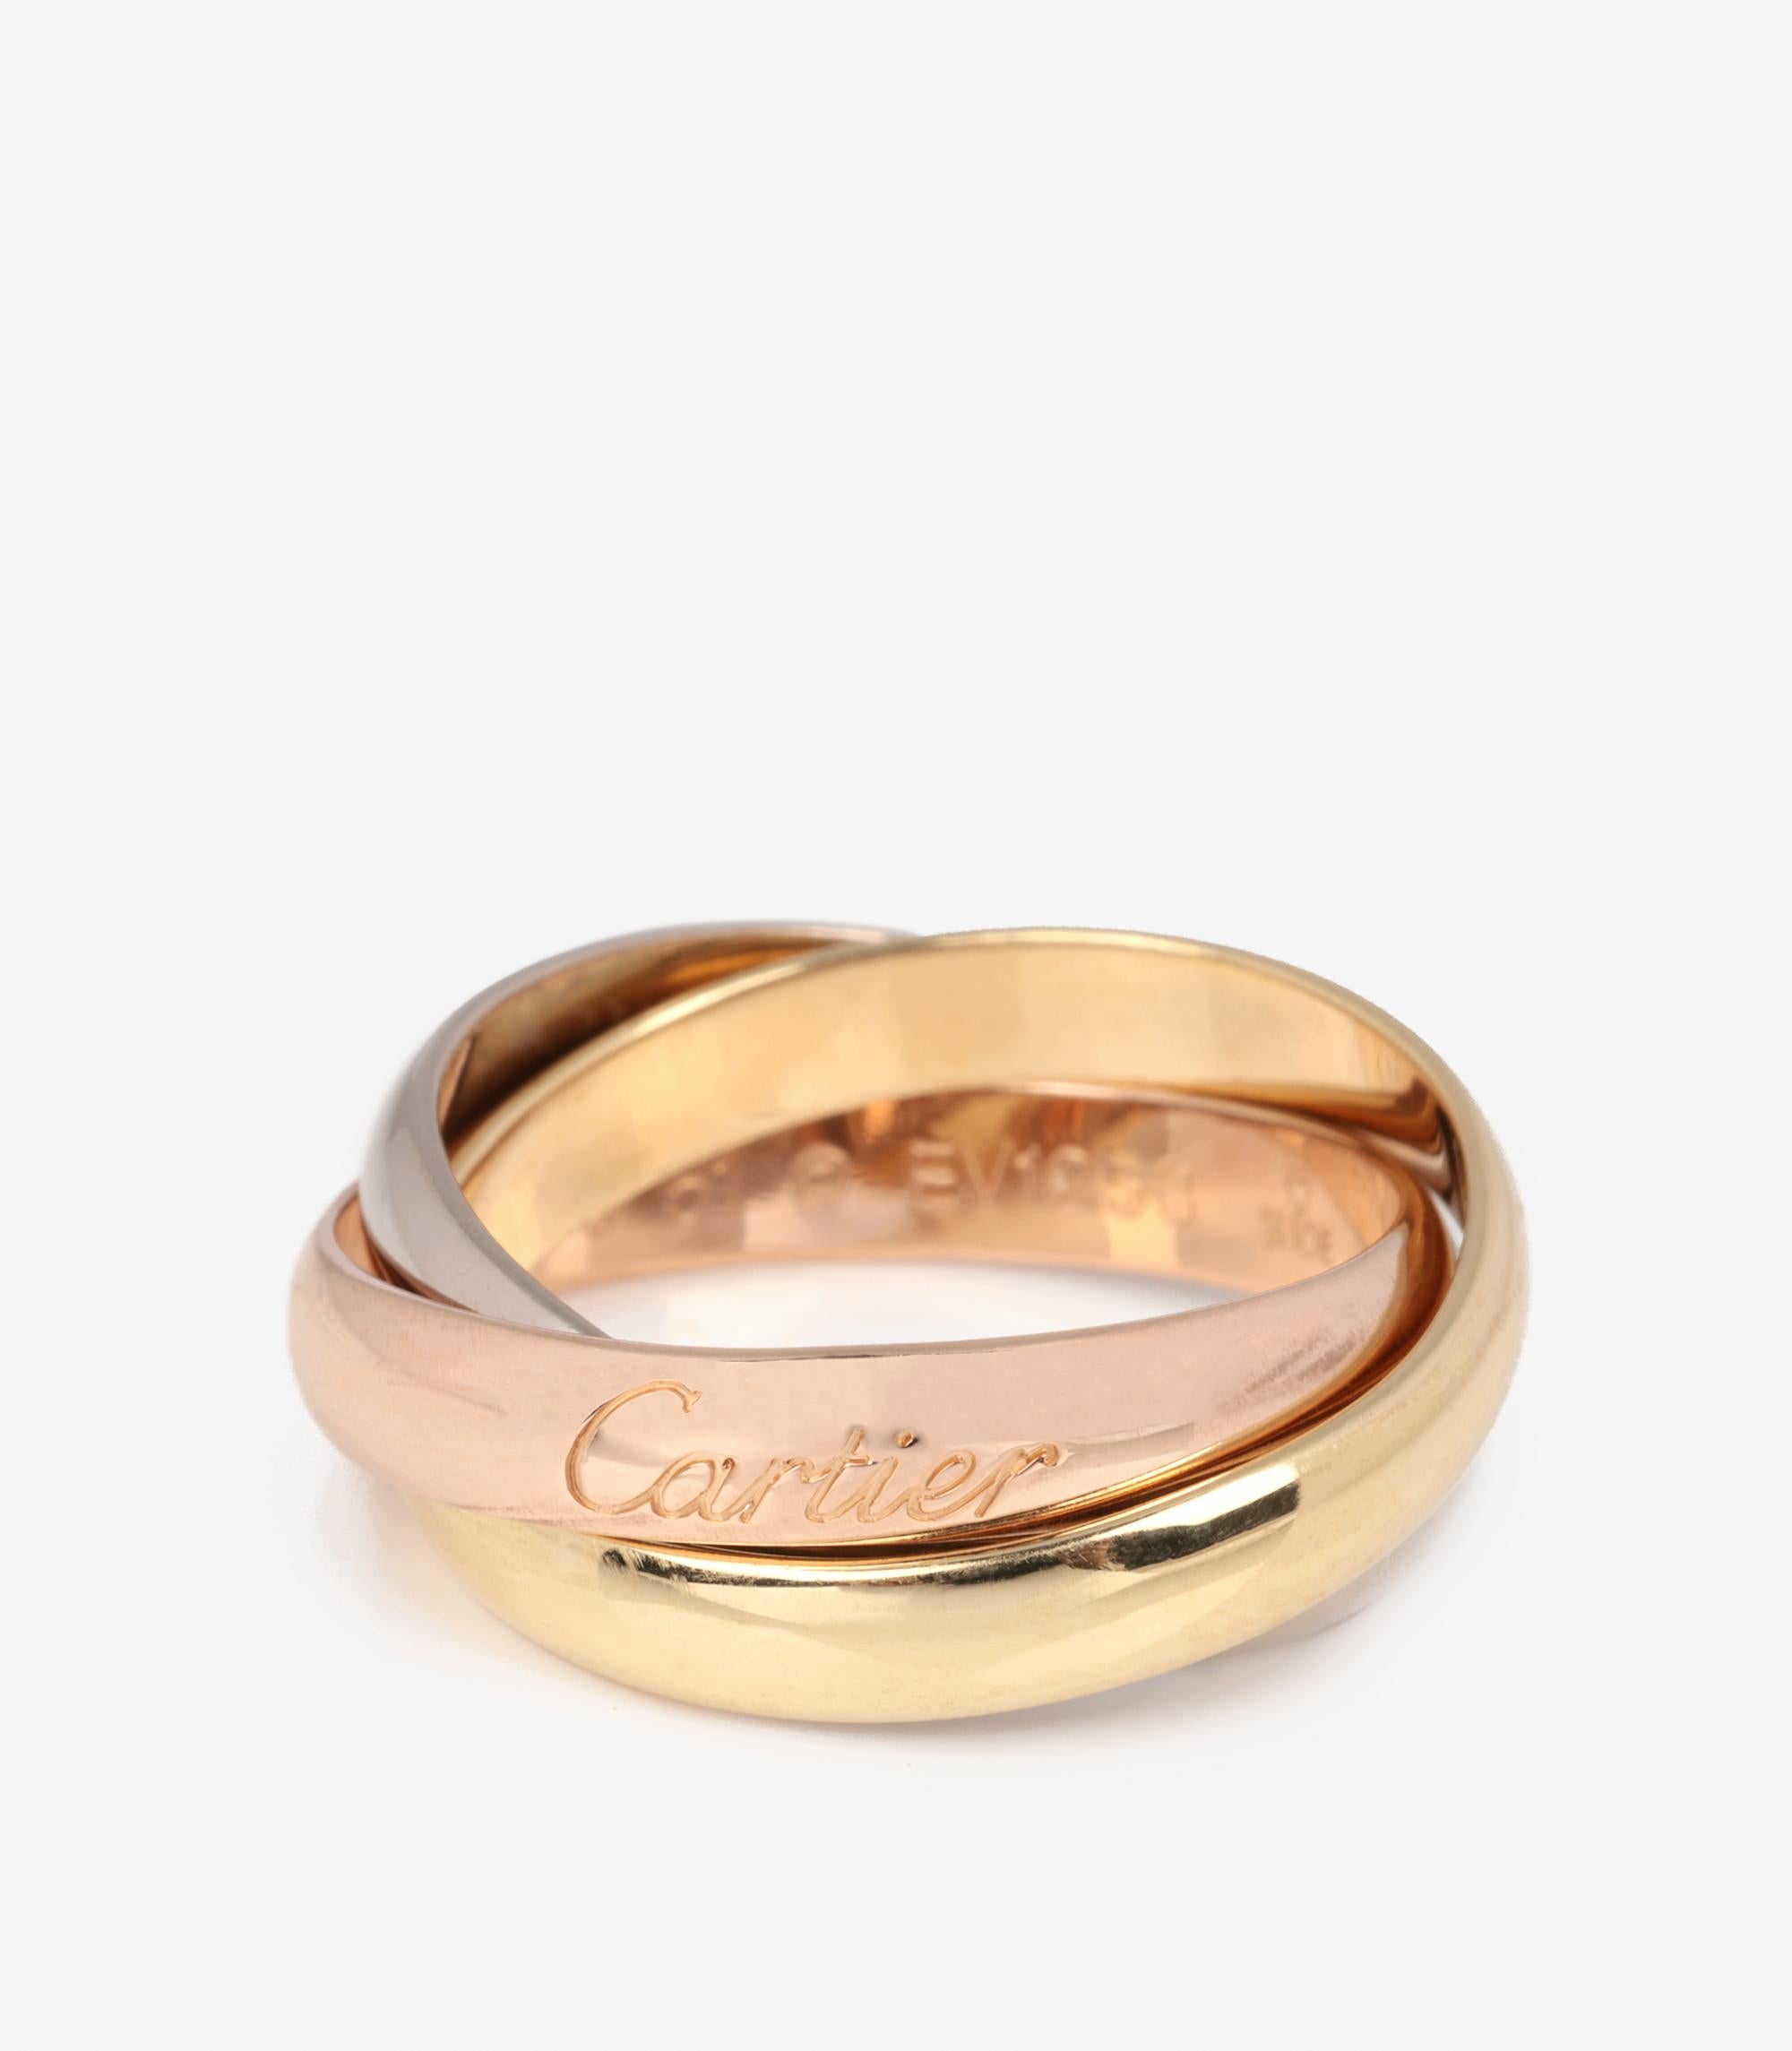 Cartier 18ct White Gold, 18ct Yellow Gold And 18ct Rose Gold Medium Trinity Ring

Brand- Cartier
Model- Medium Trinity Ring
Product Type- Ring
Serial Number- EV****
Age- Circa 2006
Accompanied By- Cartier Certificate
Material(s)- 18ct White Gold,